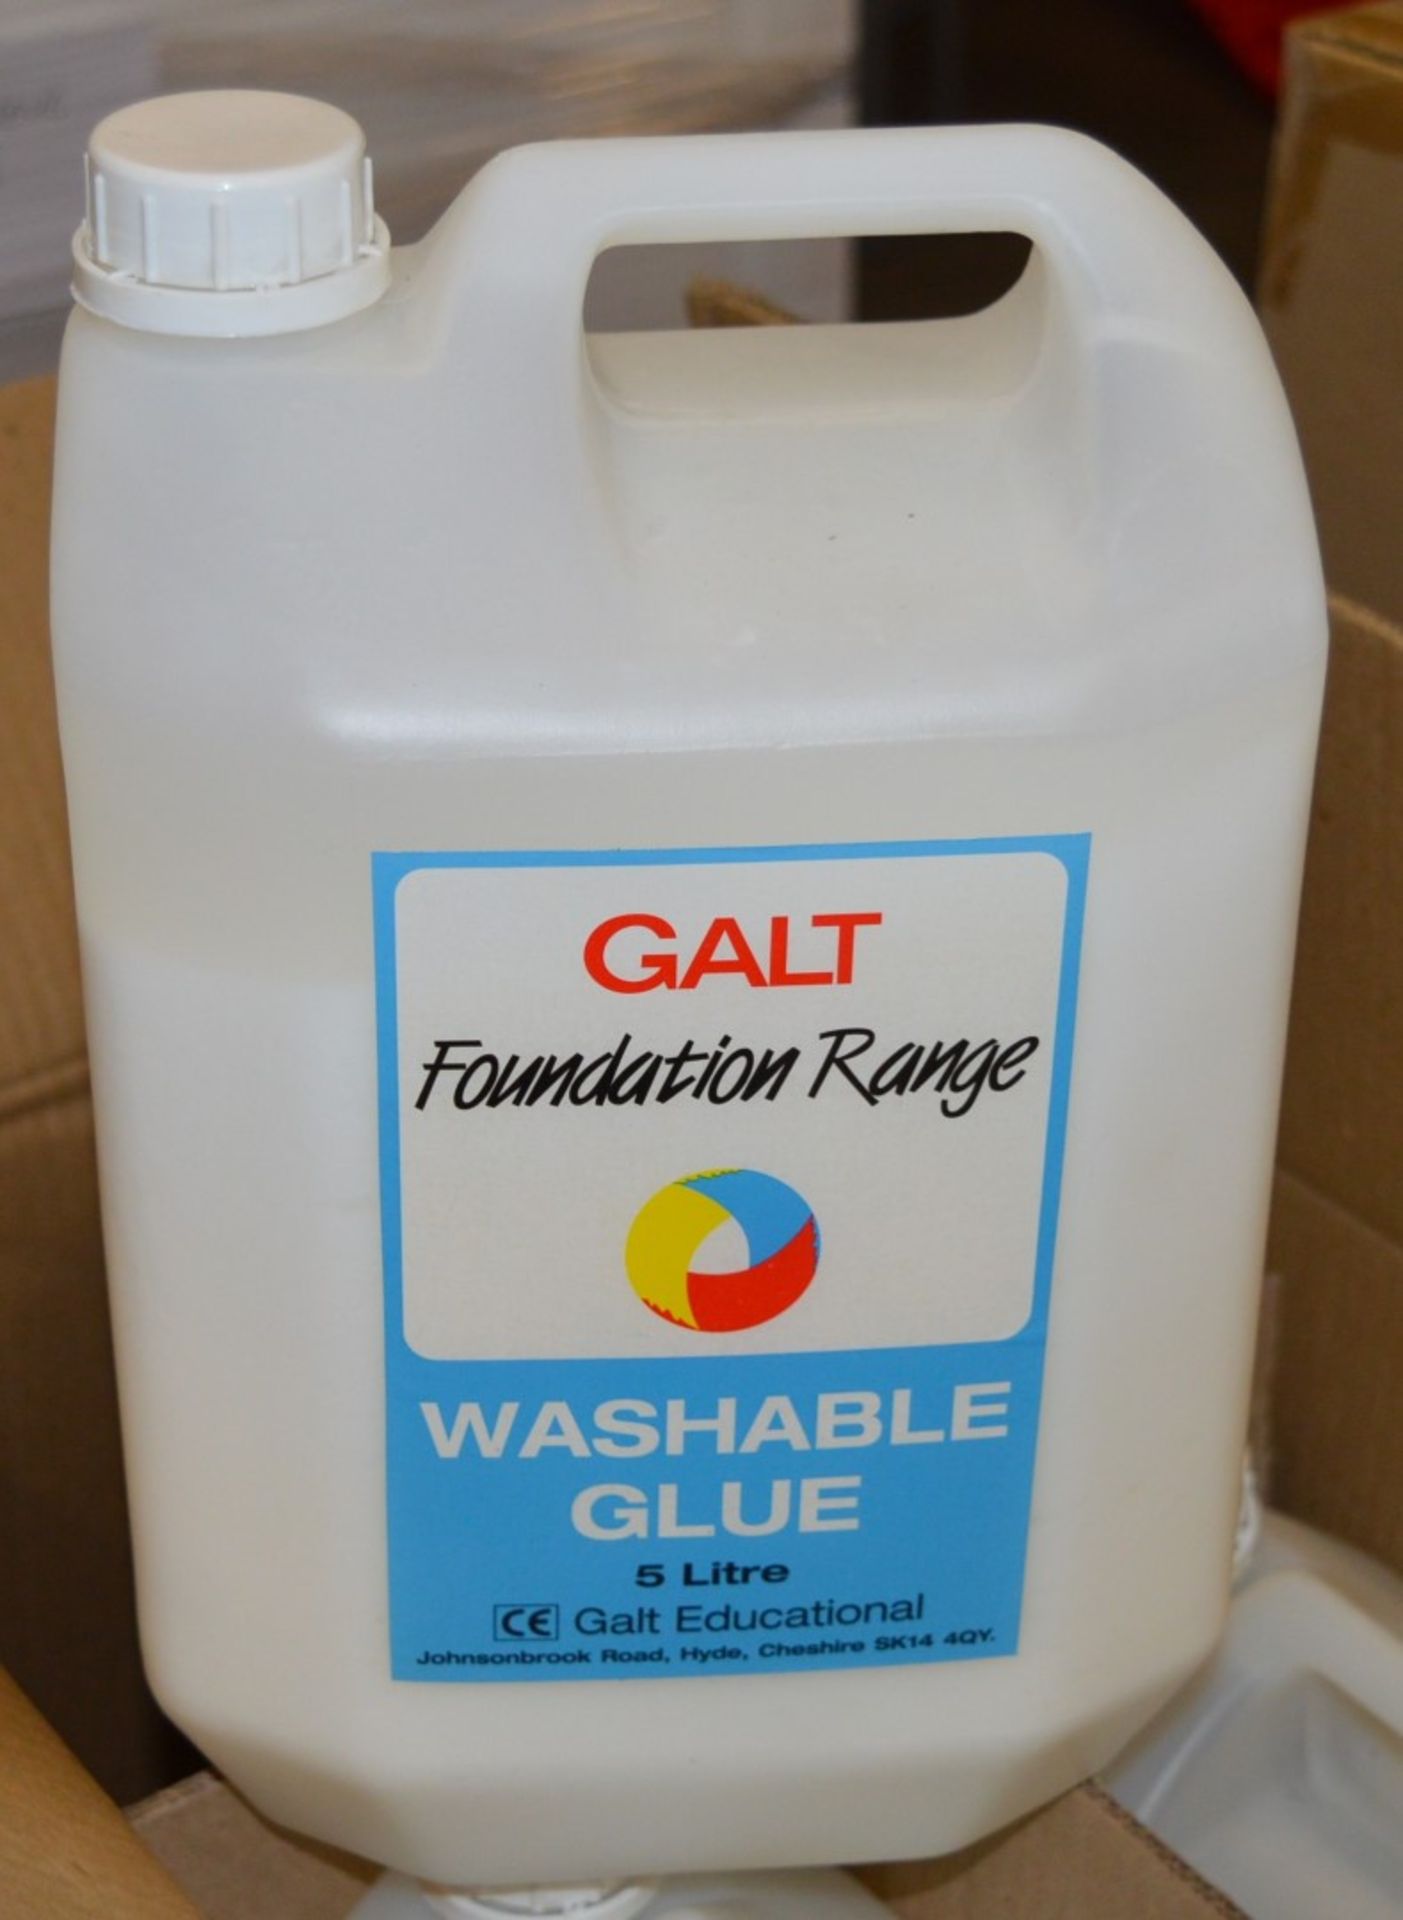 4 x Foundation Range Washable Glue - 5 Litre Containers - Brand New Stock - CL185 - Ref DRT0025 -